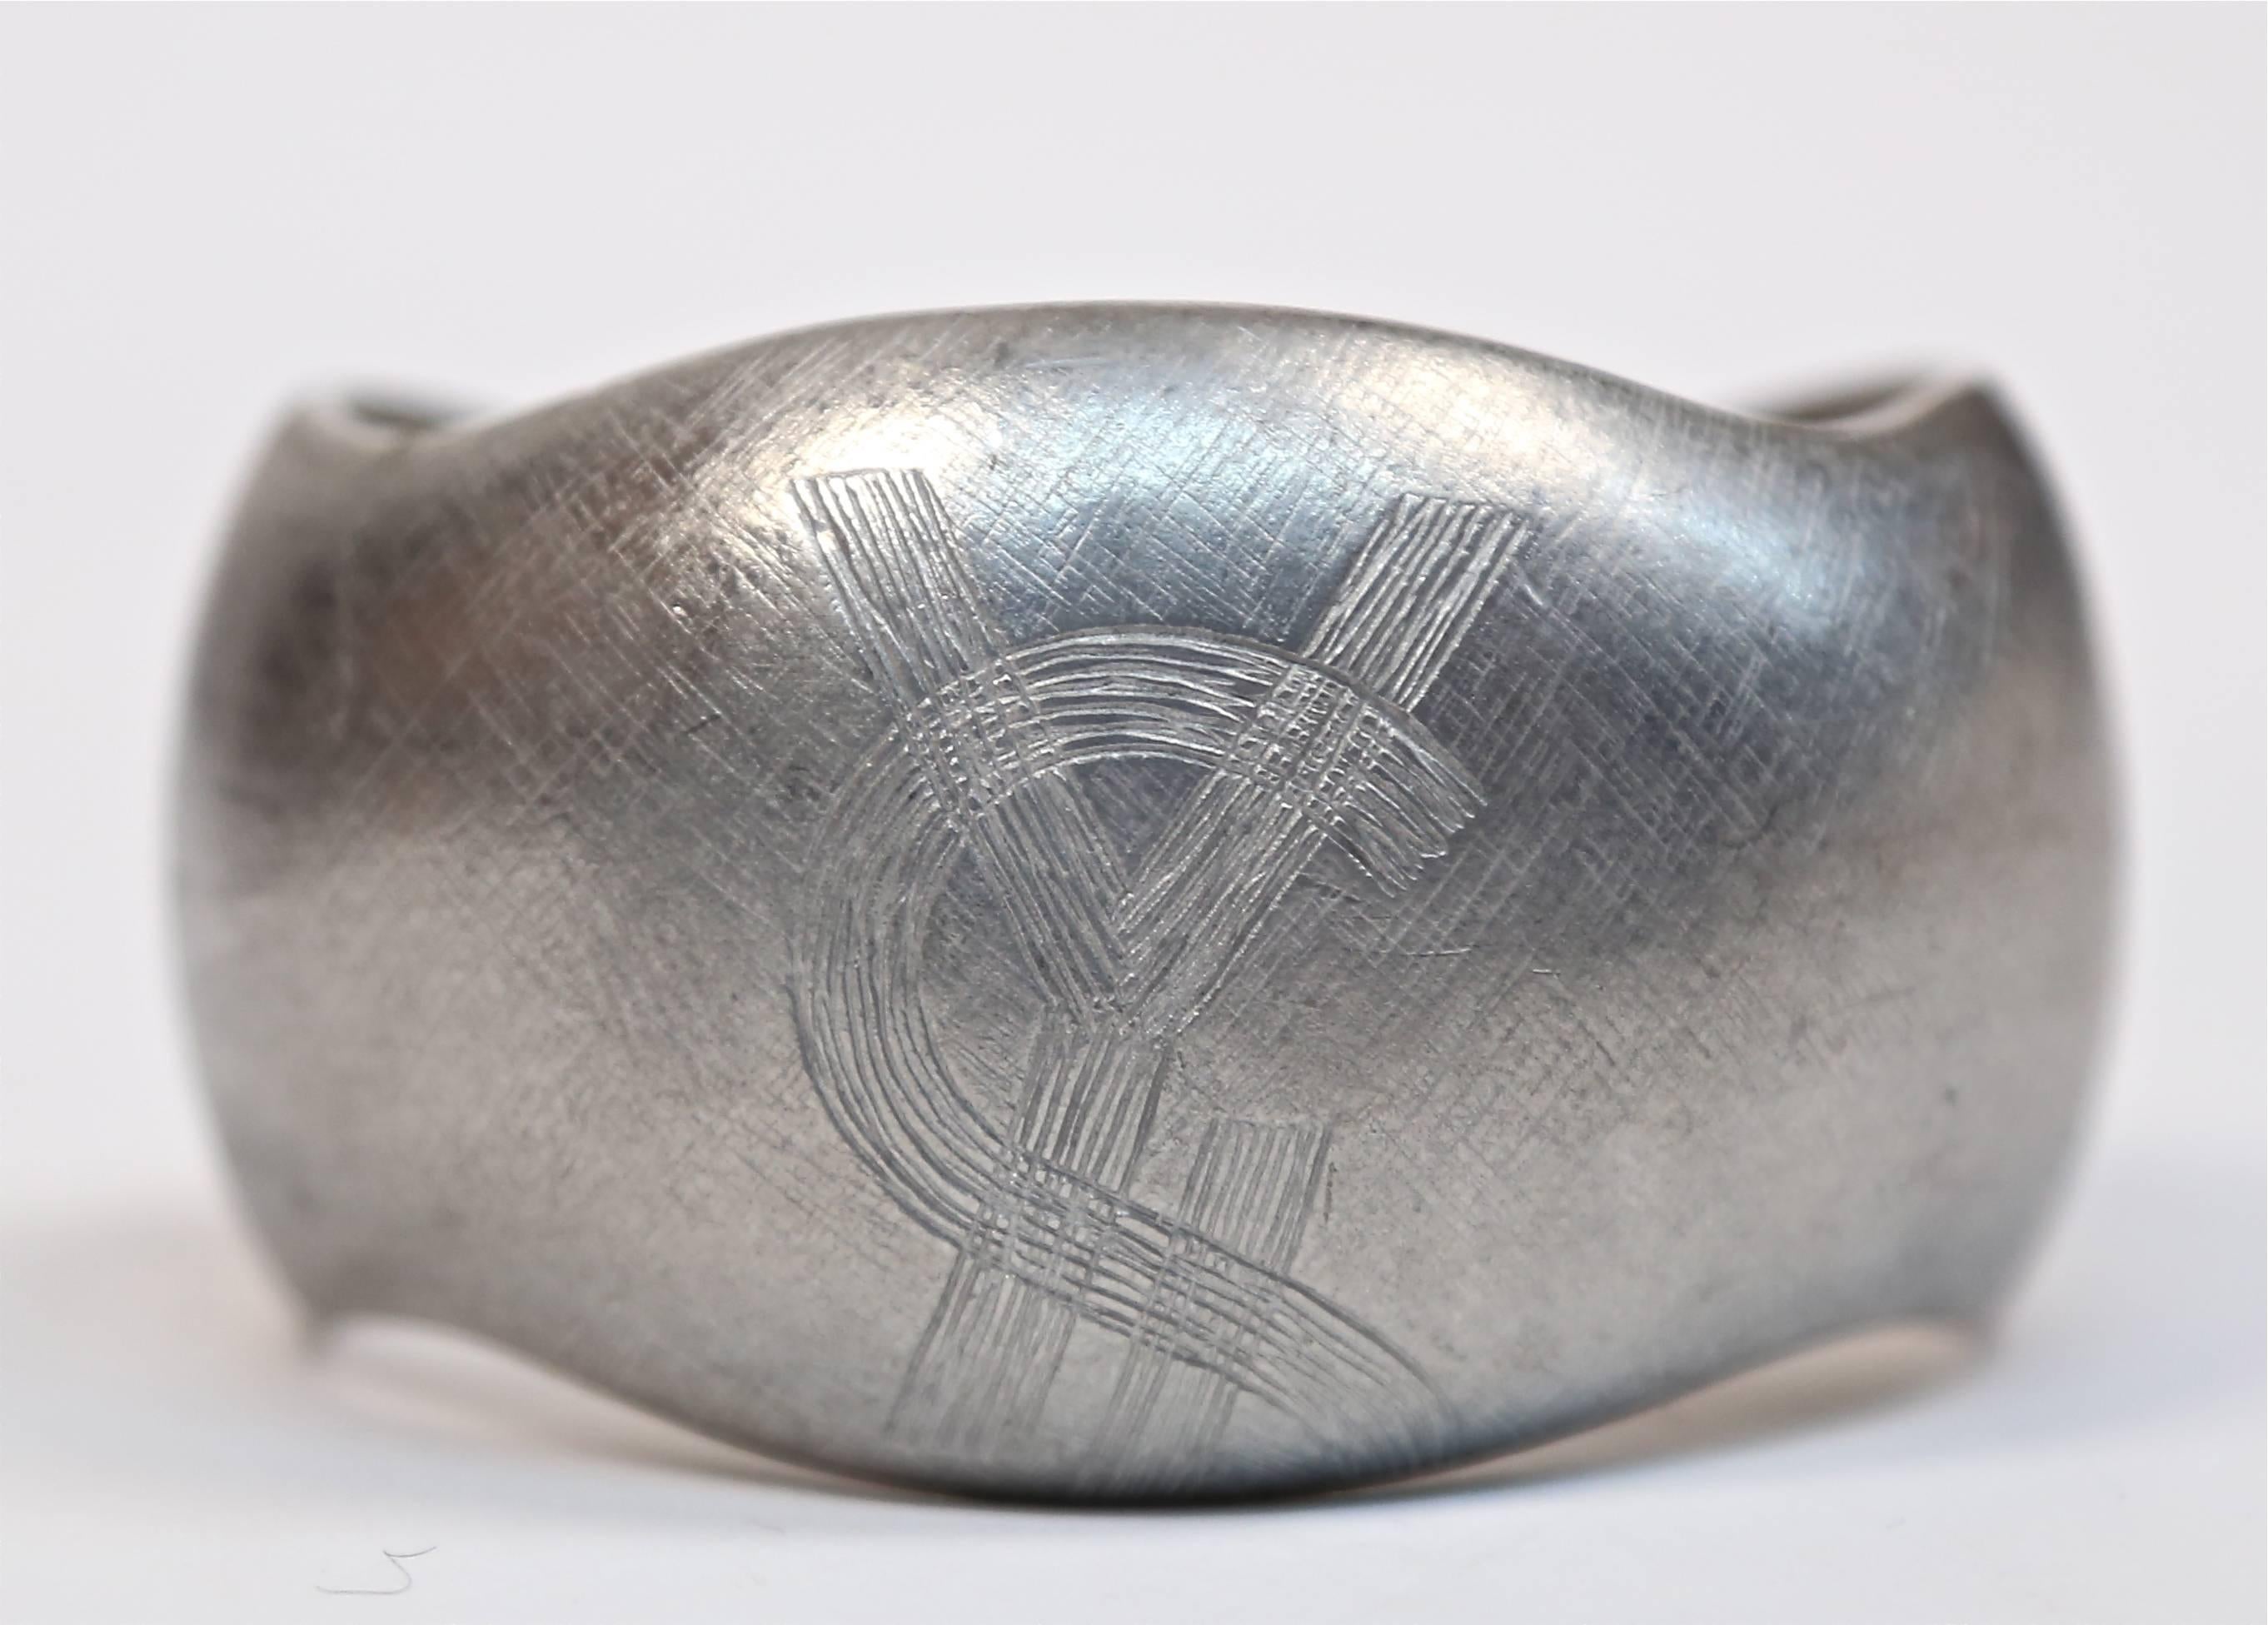 Brushed silver cuffs in silver toned metal by Yves Saint Laurent dating to 1985 Both bracelets measure approximately 6